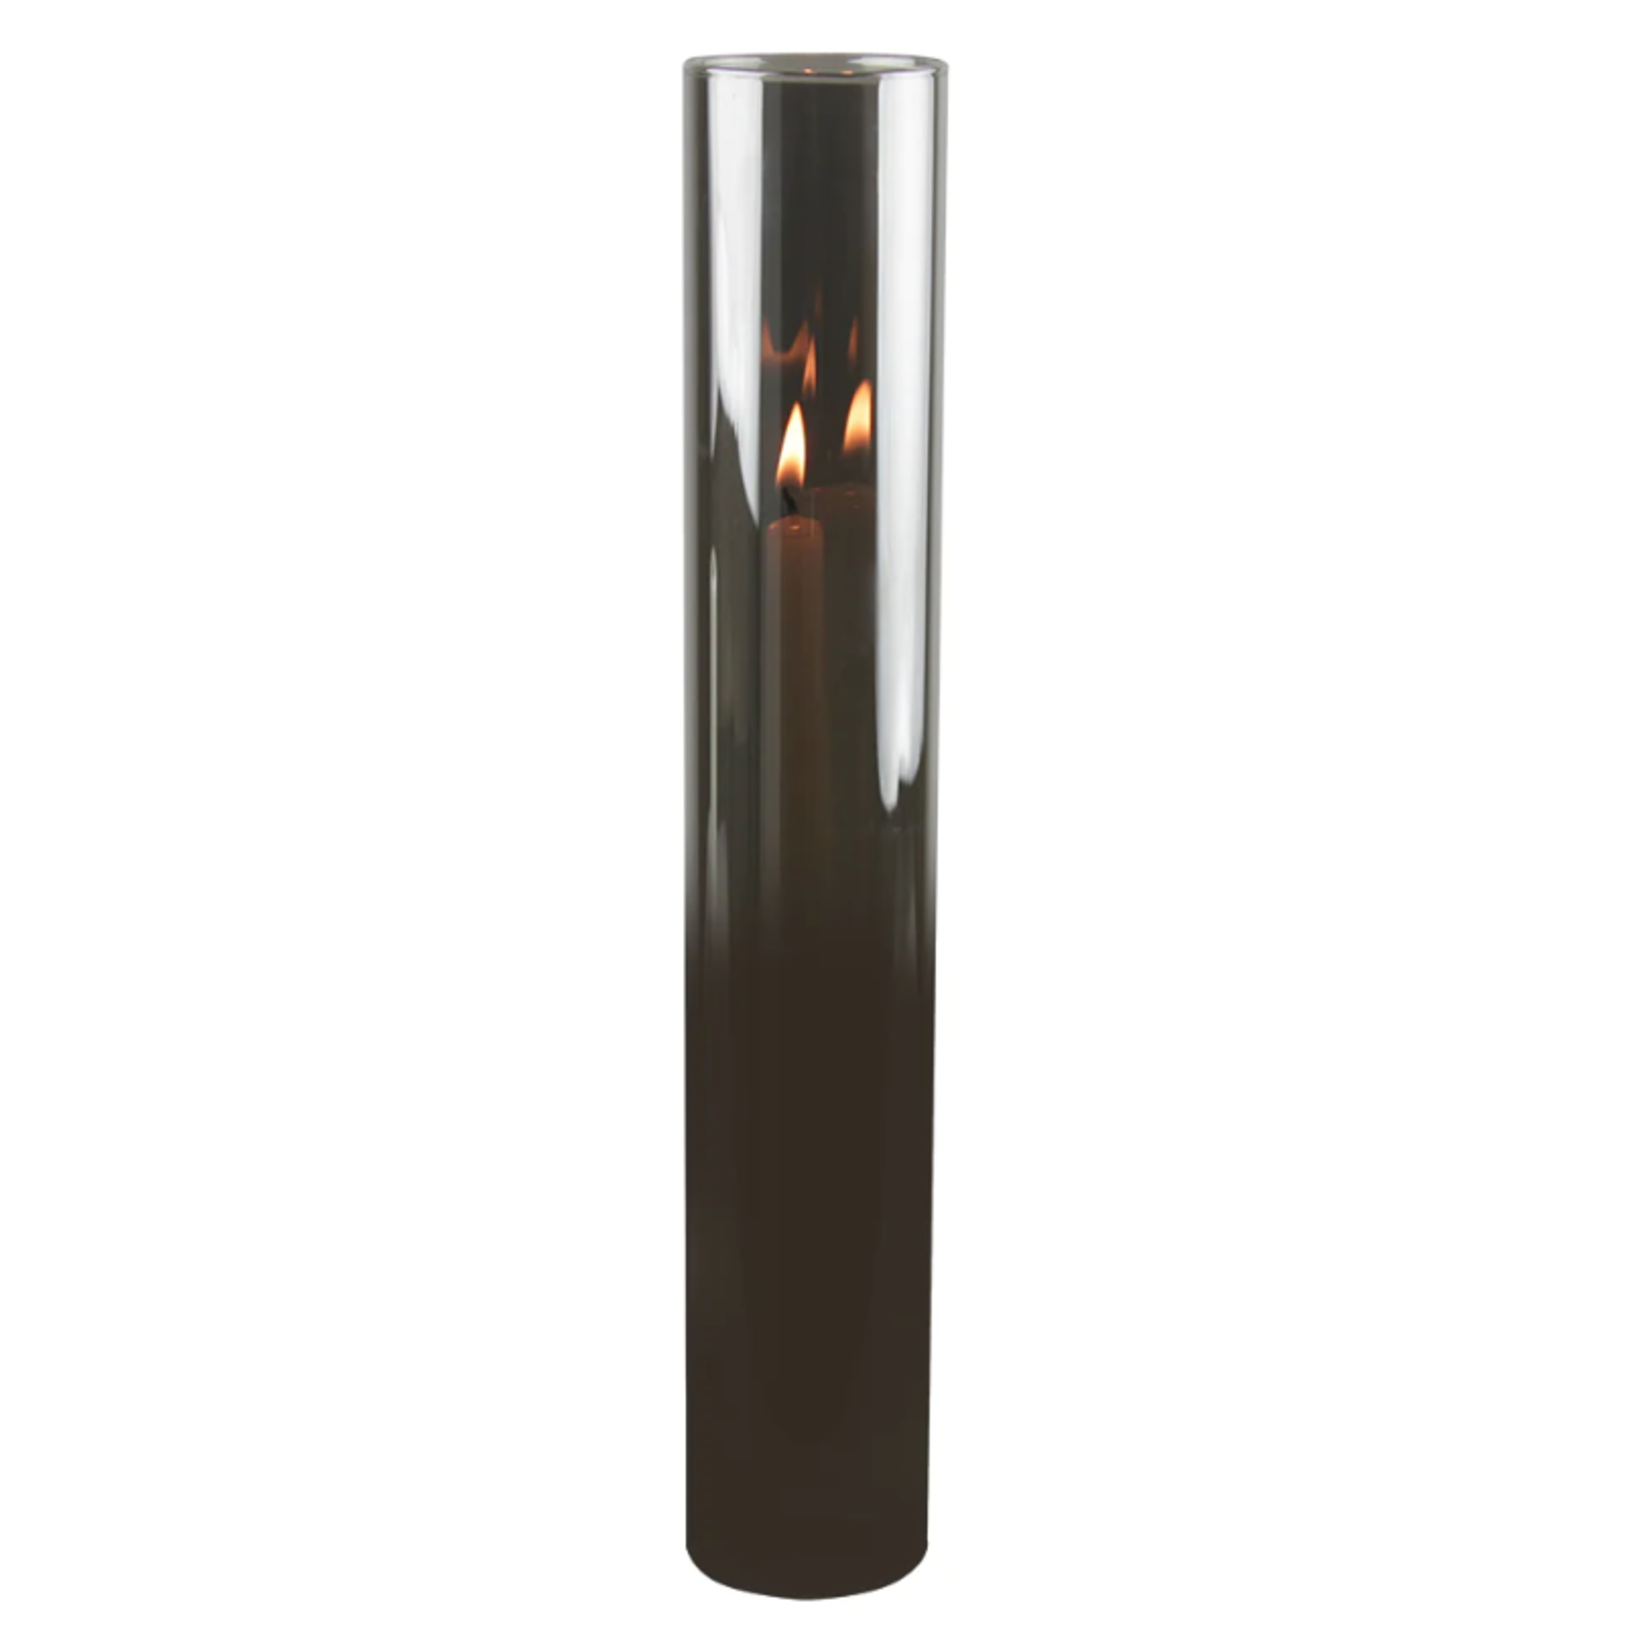 14”H X 2.35” BLACK SMOKED GLASS CHIMNEY (OPEN AT THE BOTTOM AND THE TOP)